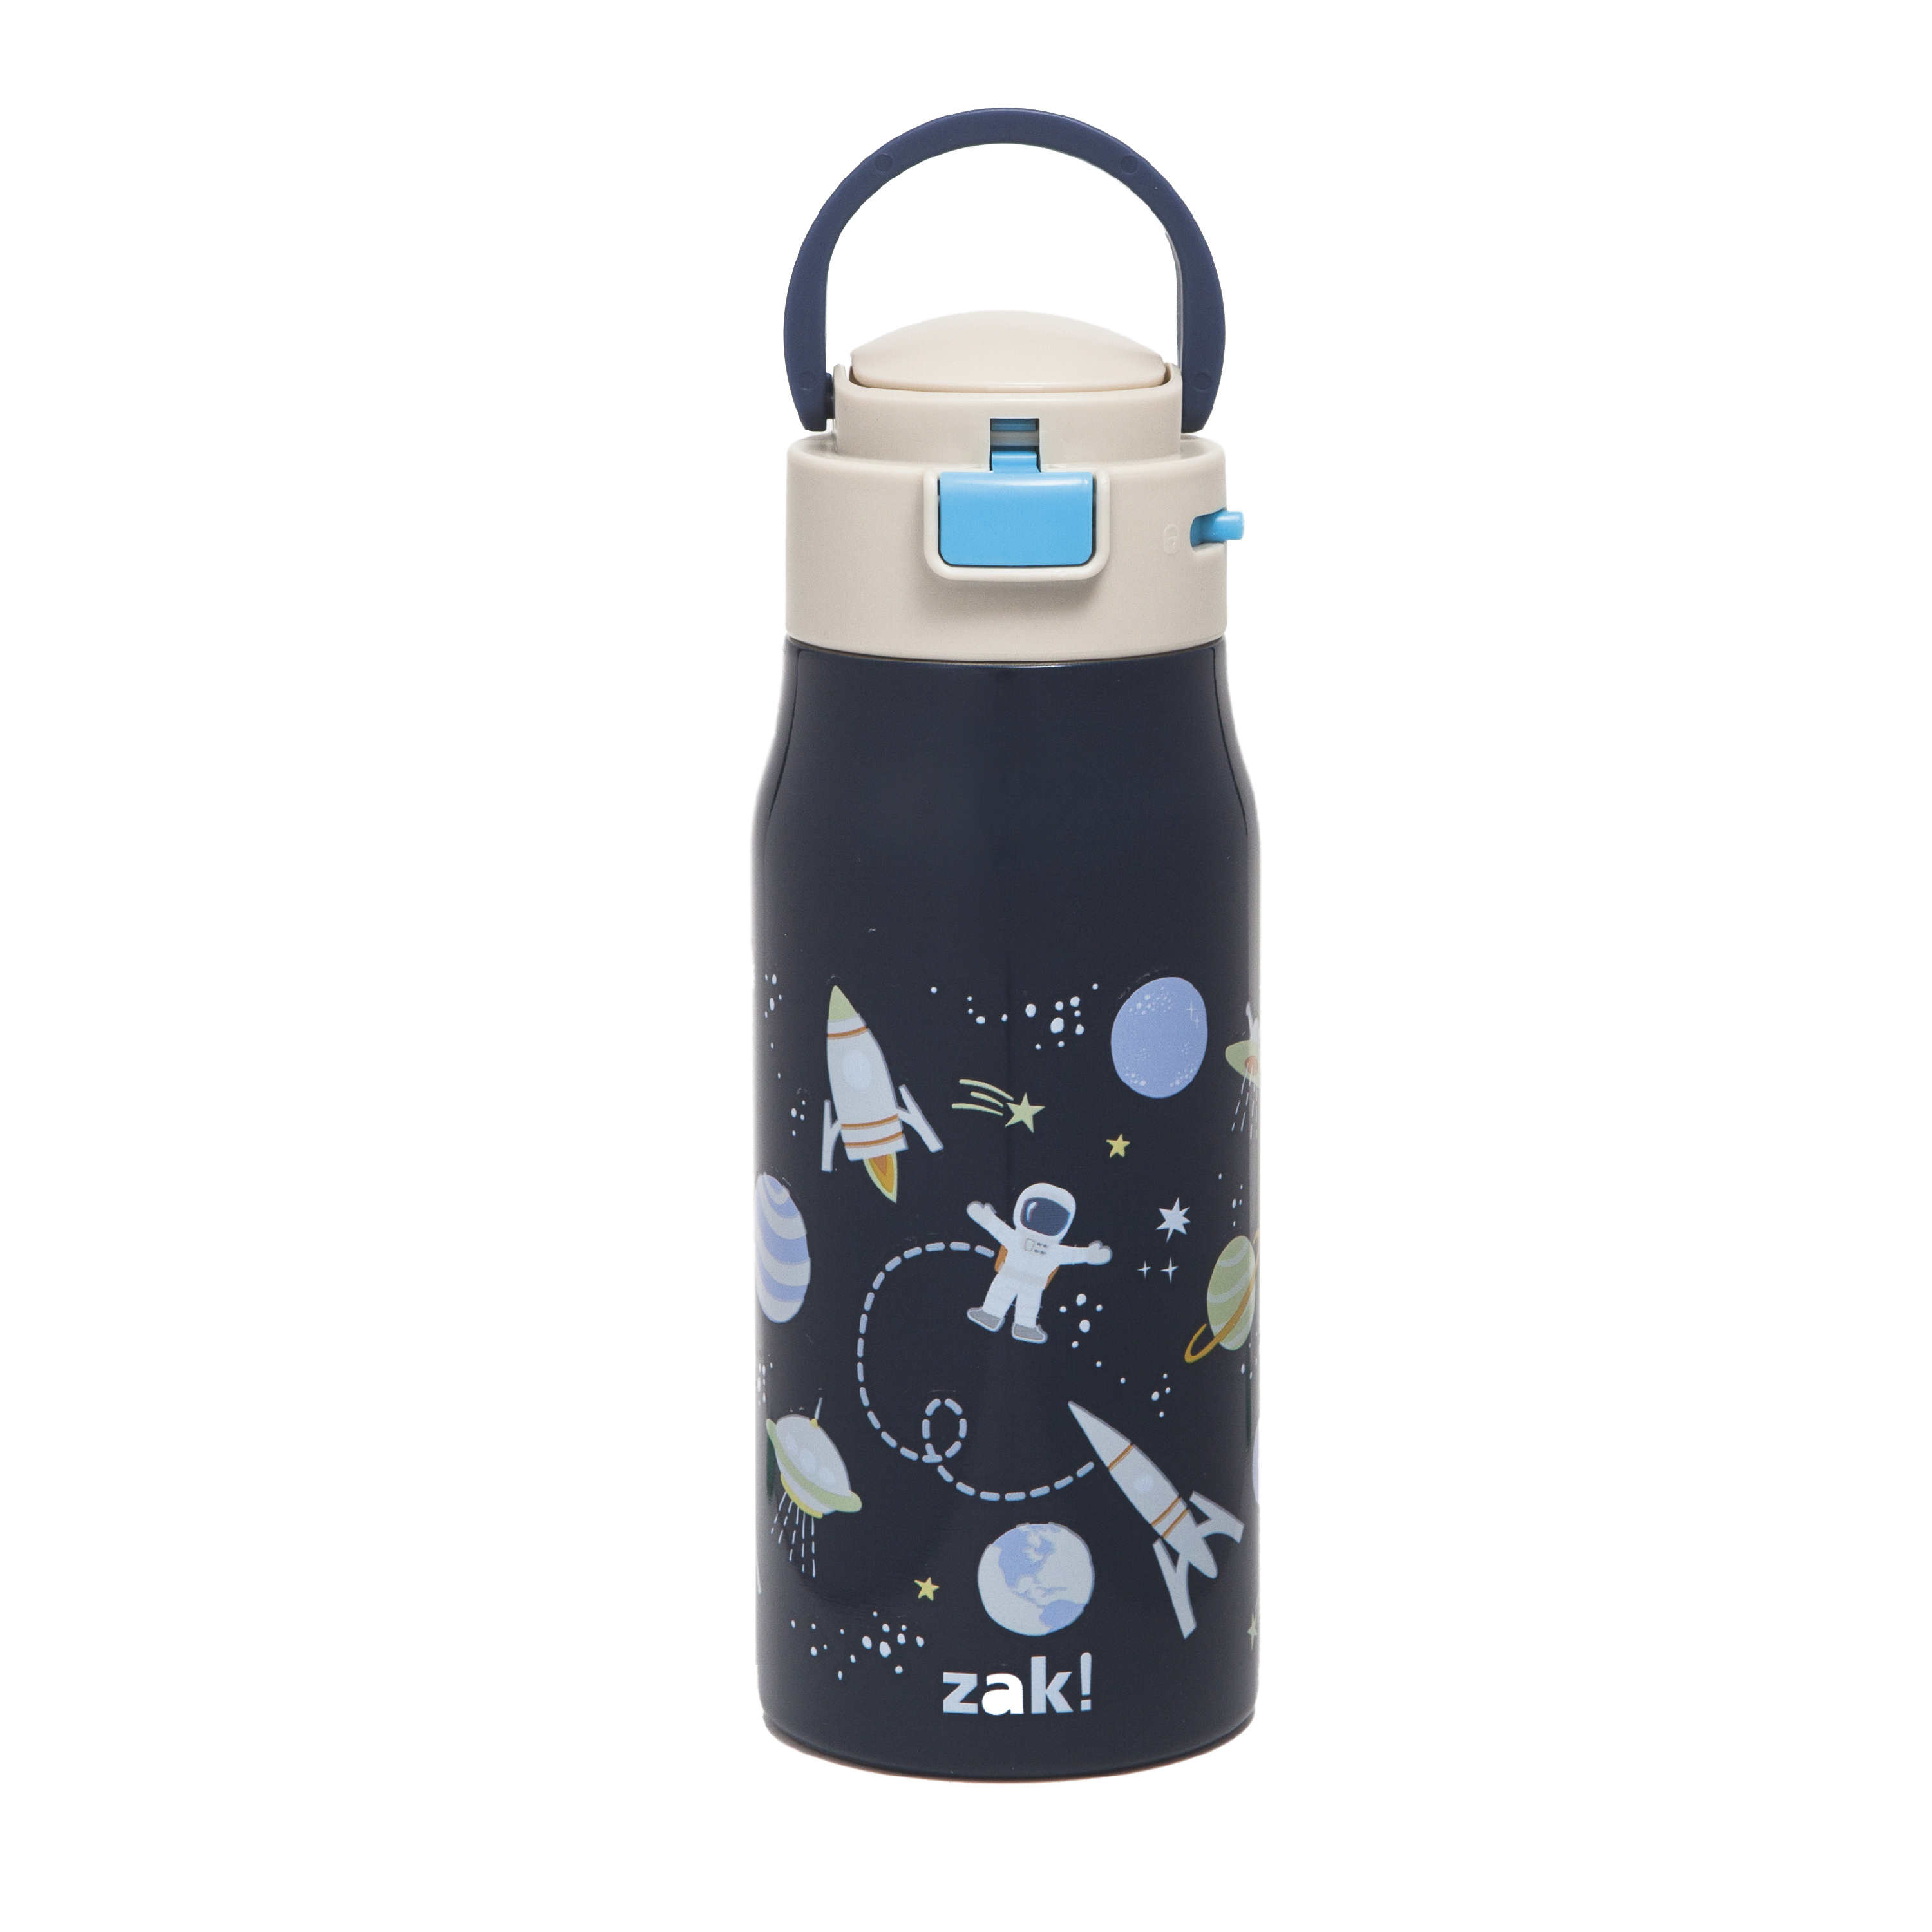 Zak Kids 13.5 ounce Mesa Double Wall Insulated Stainless Steel Water Bottle, Outer Space slideshow image 2